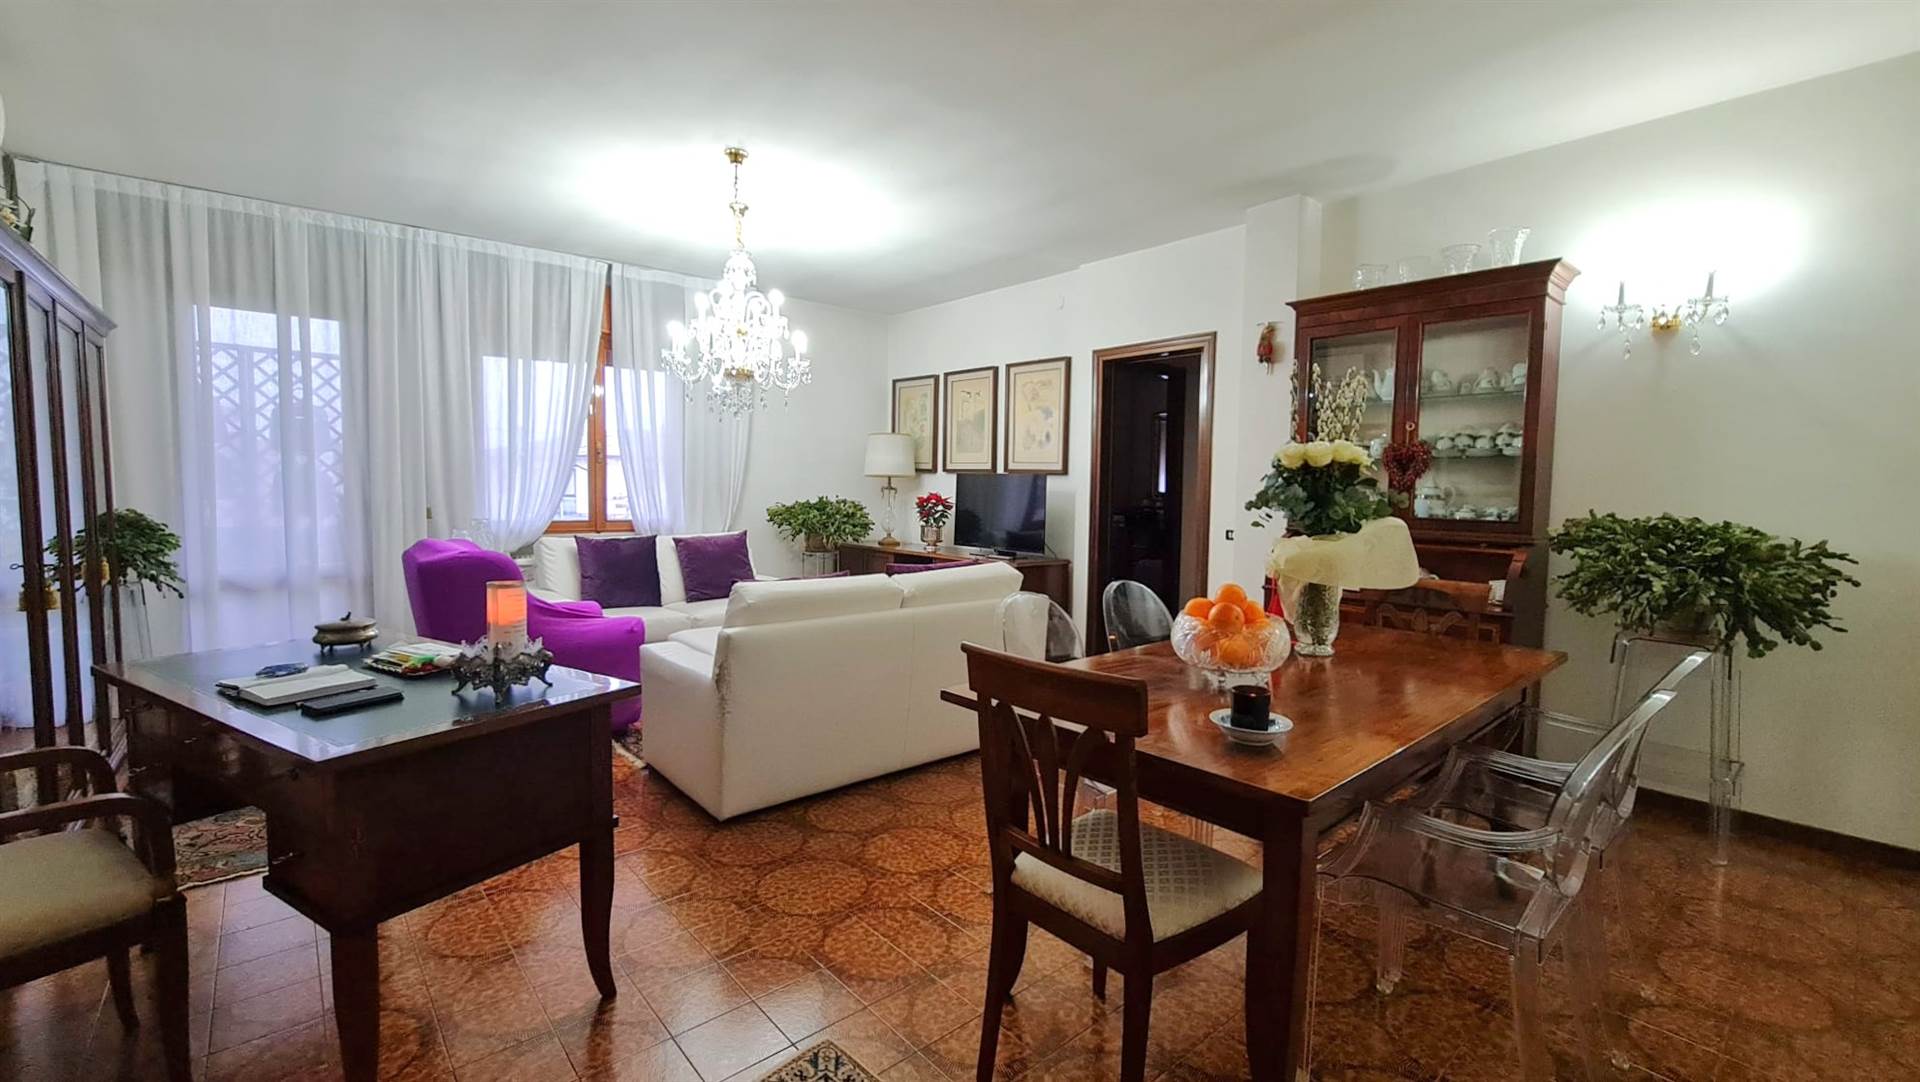 TREVIGNANO, Apartment for sale of 80 Sq. mt., Habitable, Heating Individual heating system, Energetic class: G, placed at 1° on 1, composed by: 3 